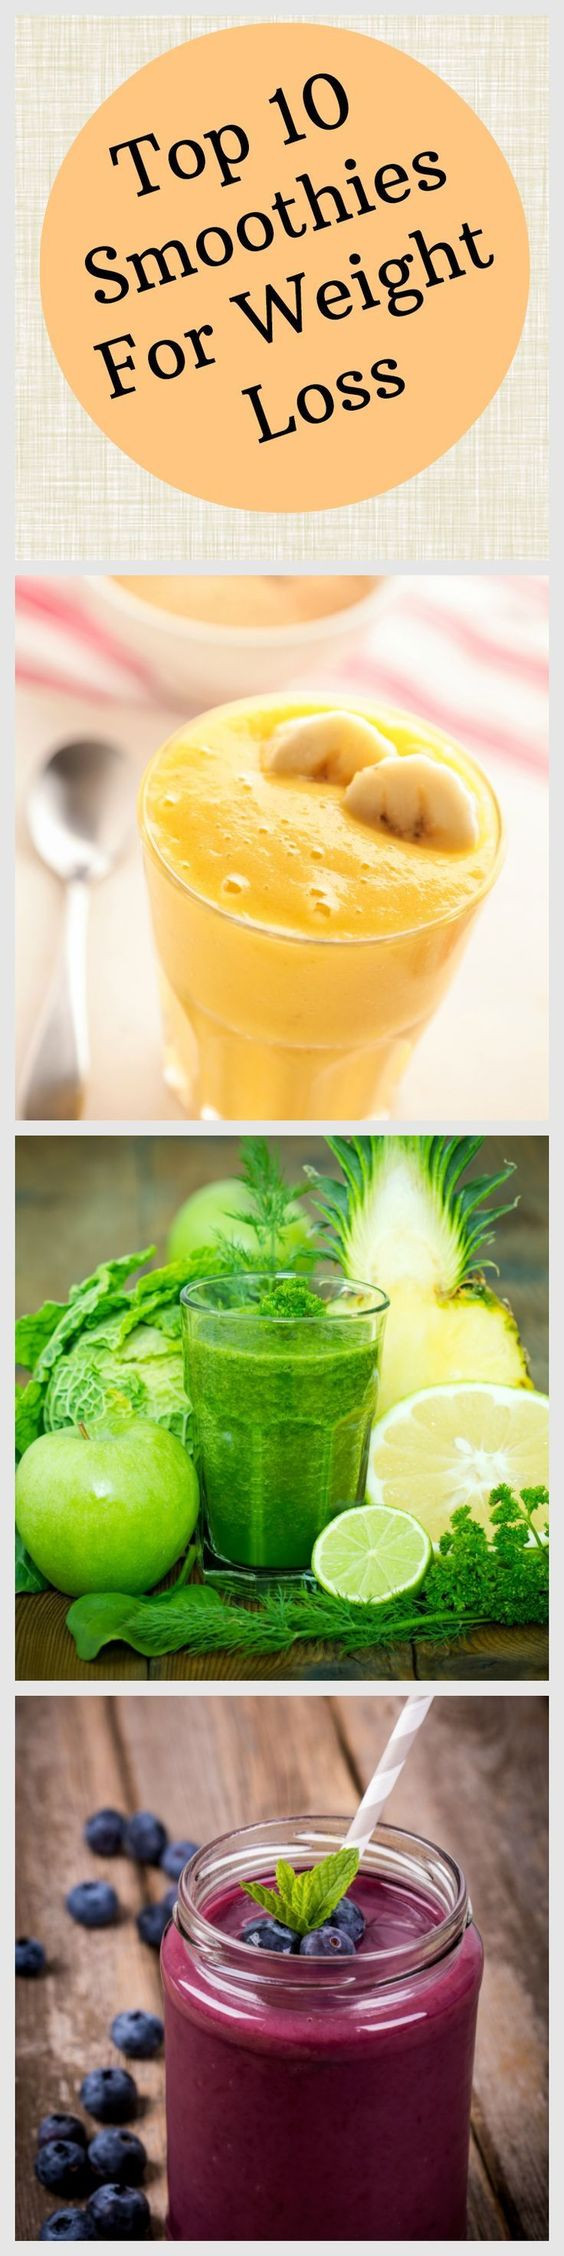 Low Calorie Smoothies For Weight Loss
 Ten Awesome Smoothies for Weight Loss low calorie but